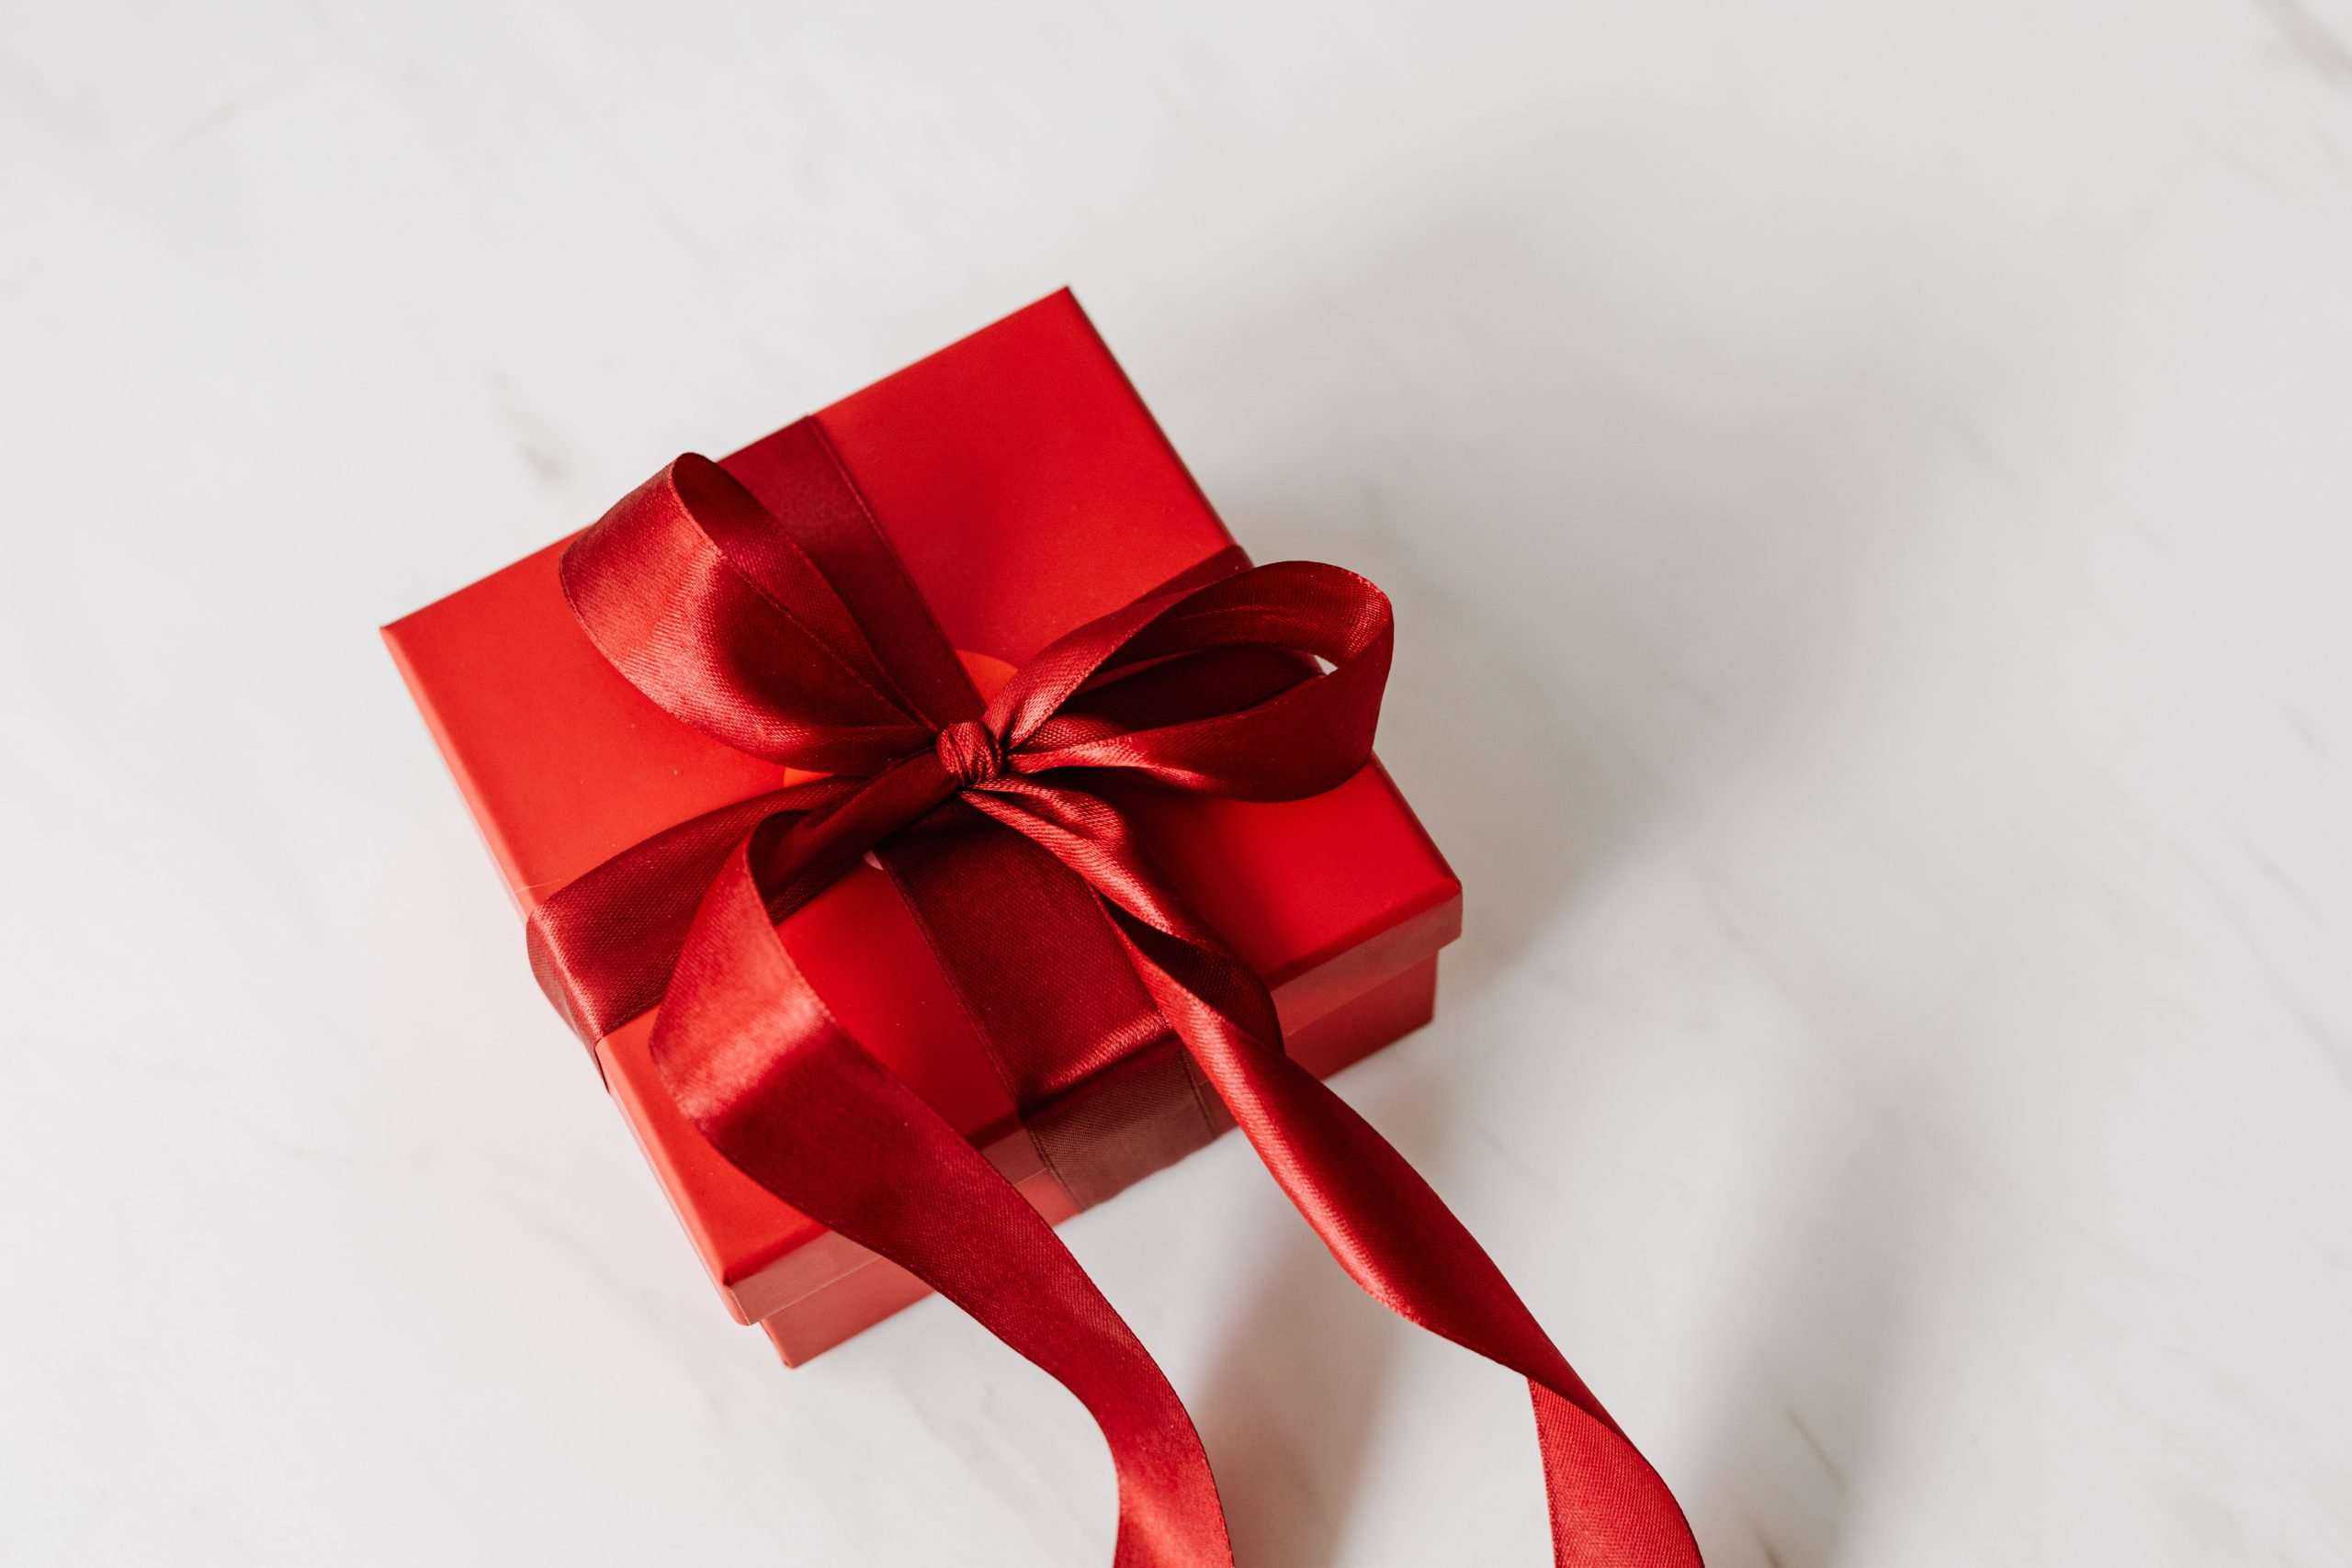 A red gift box on a white background